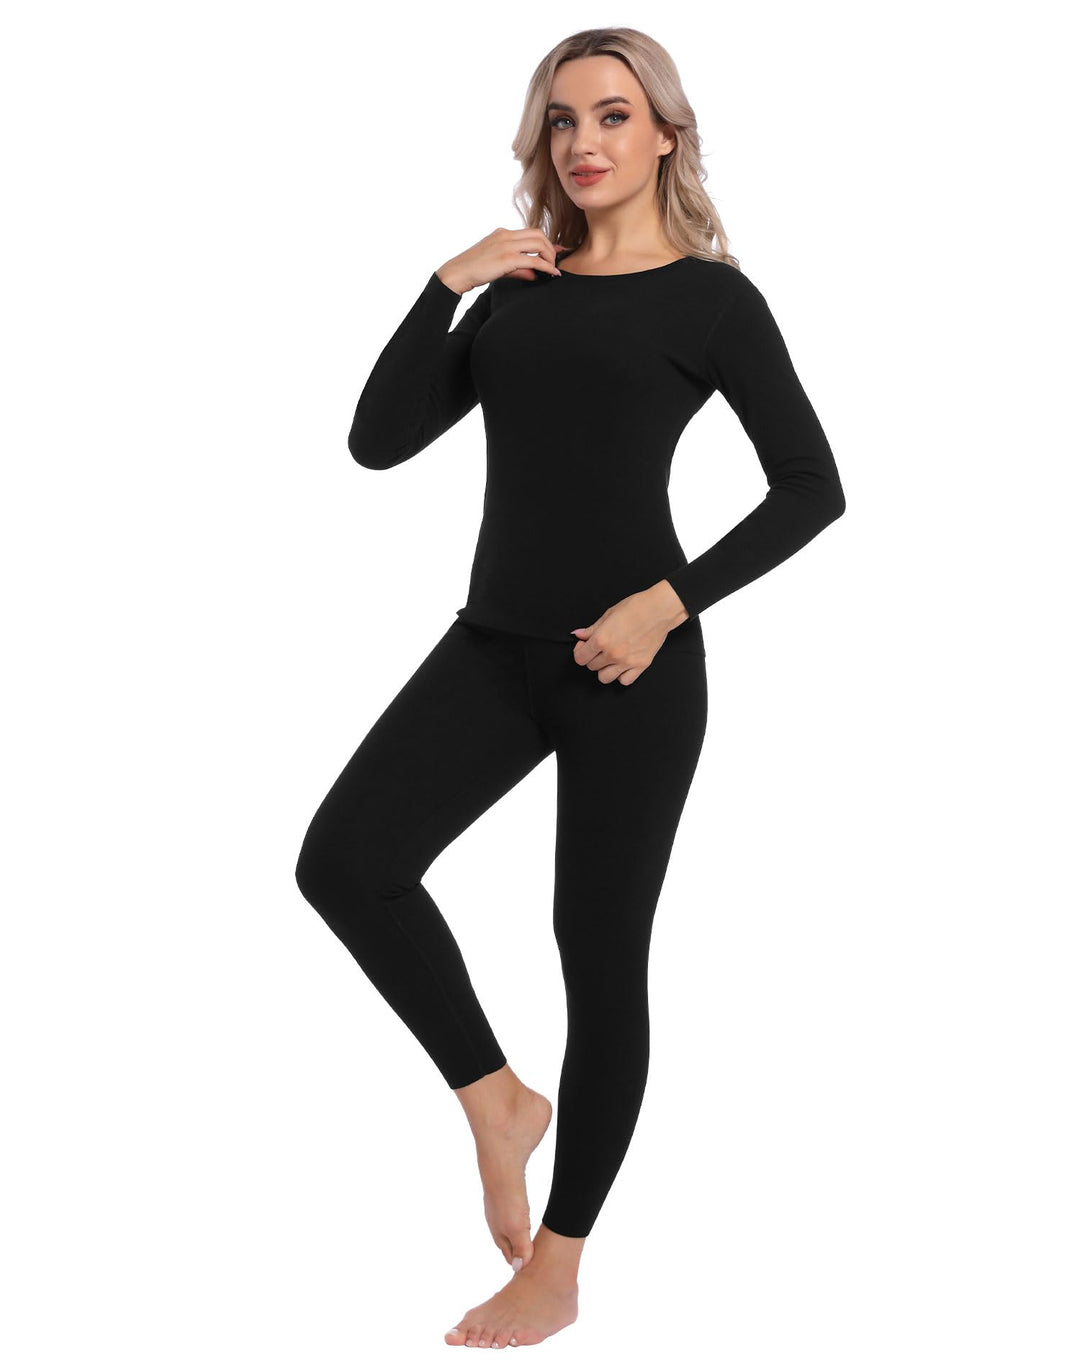 INNERSY Womens Thermal Underwear Set Stretch Base Layer Long